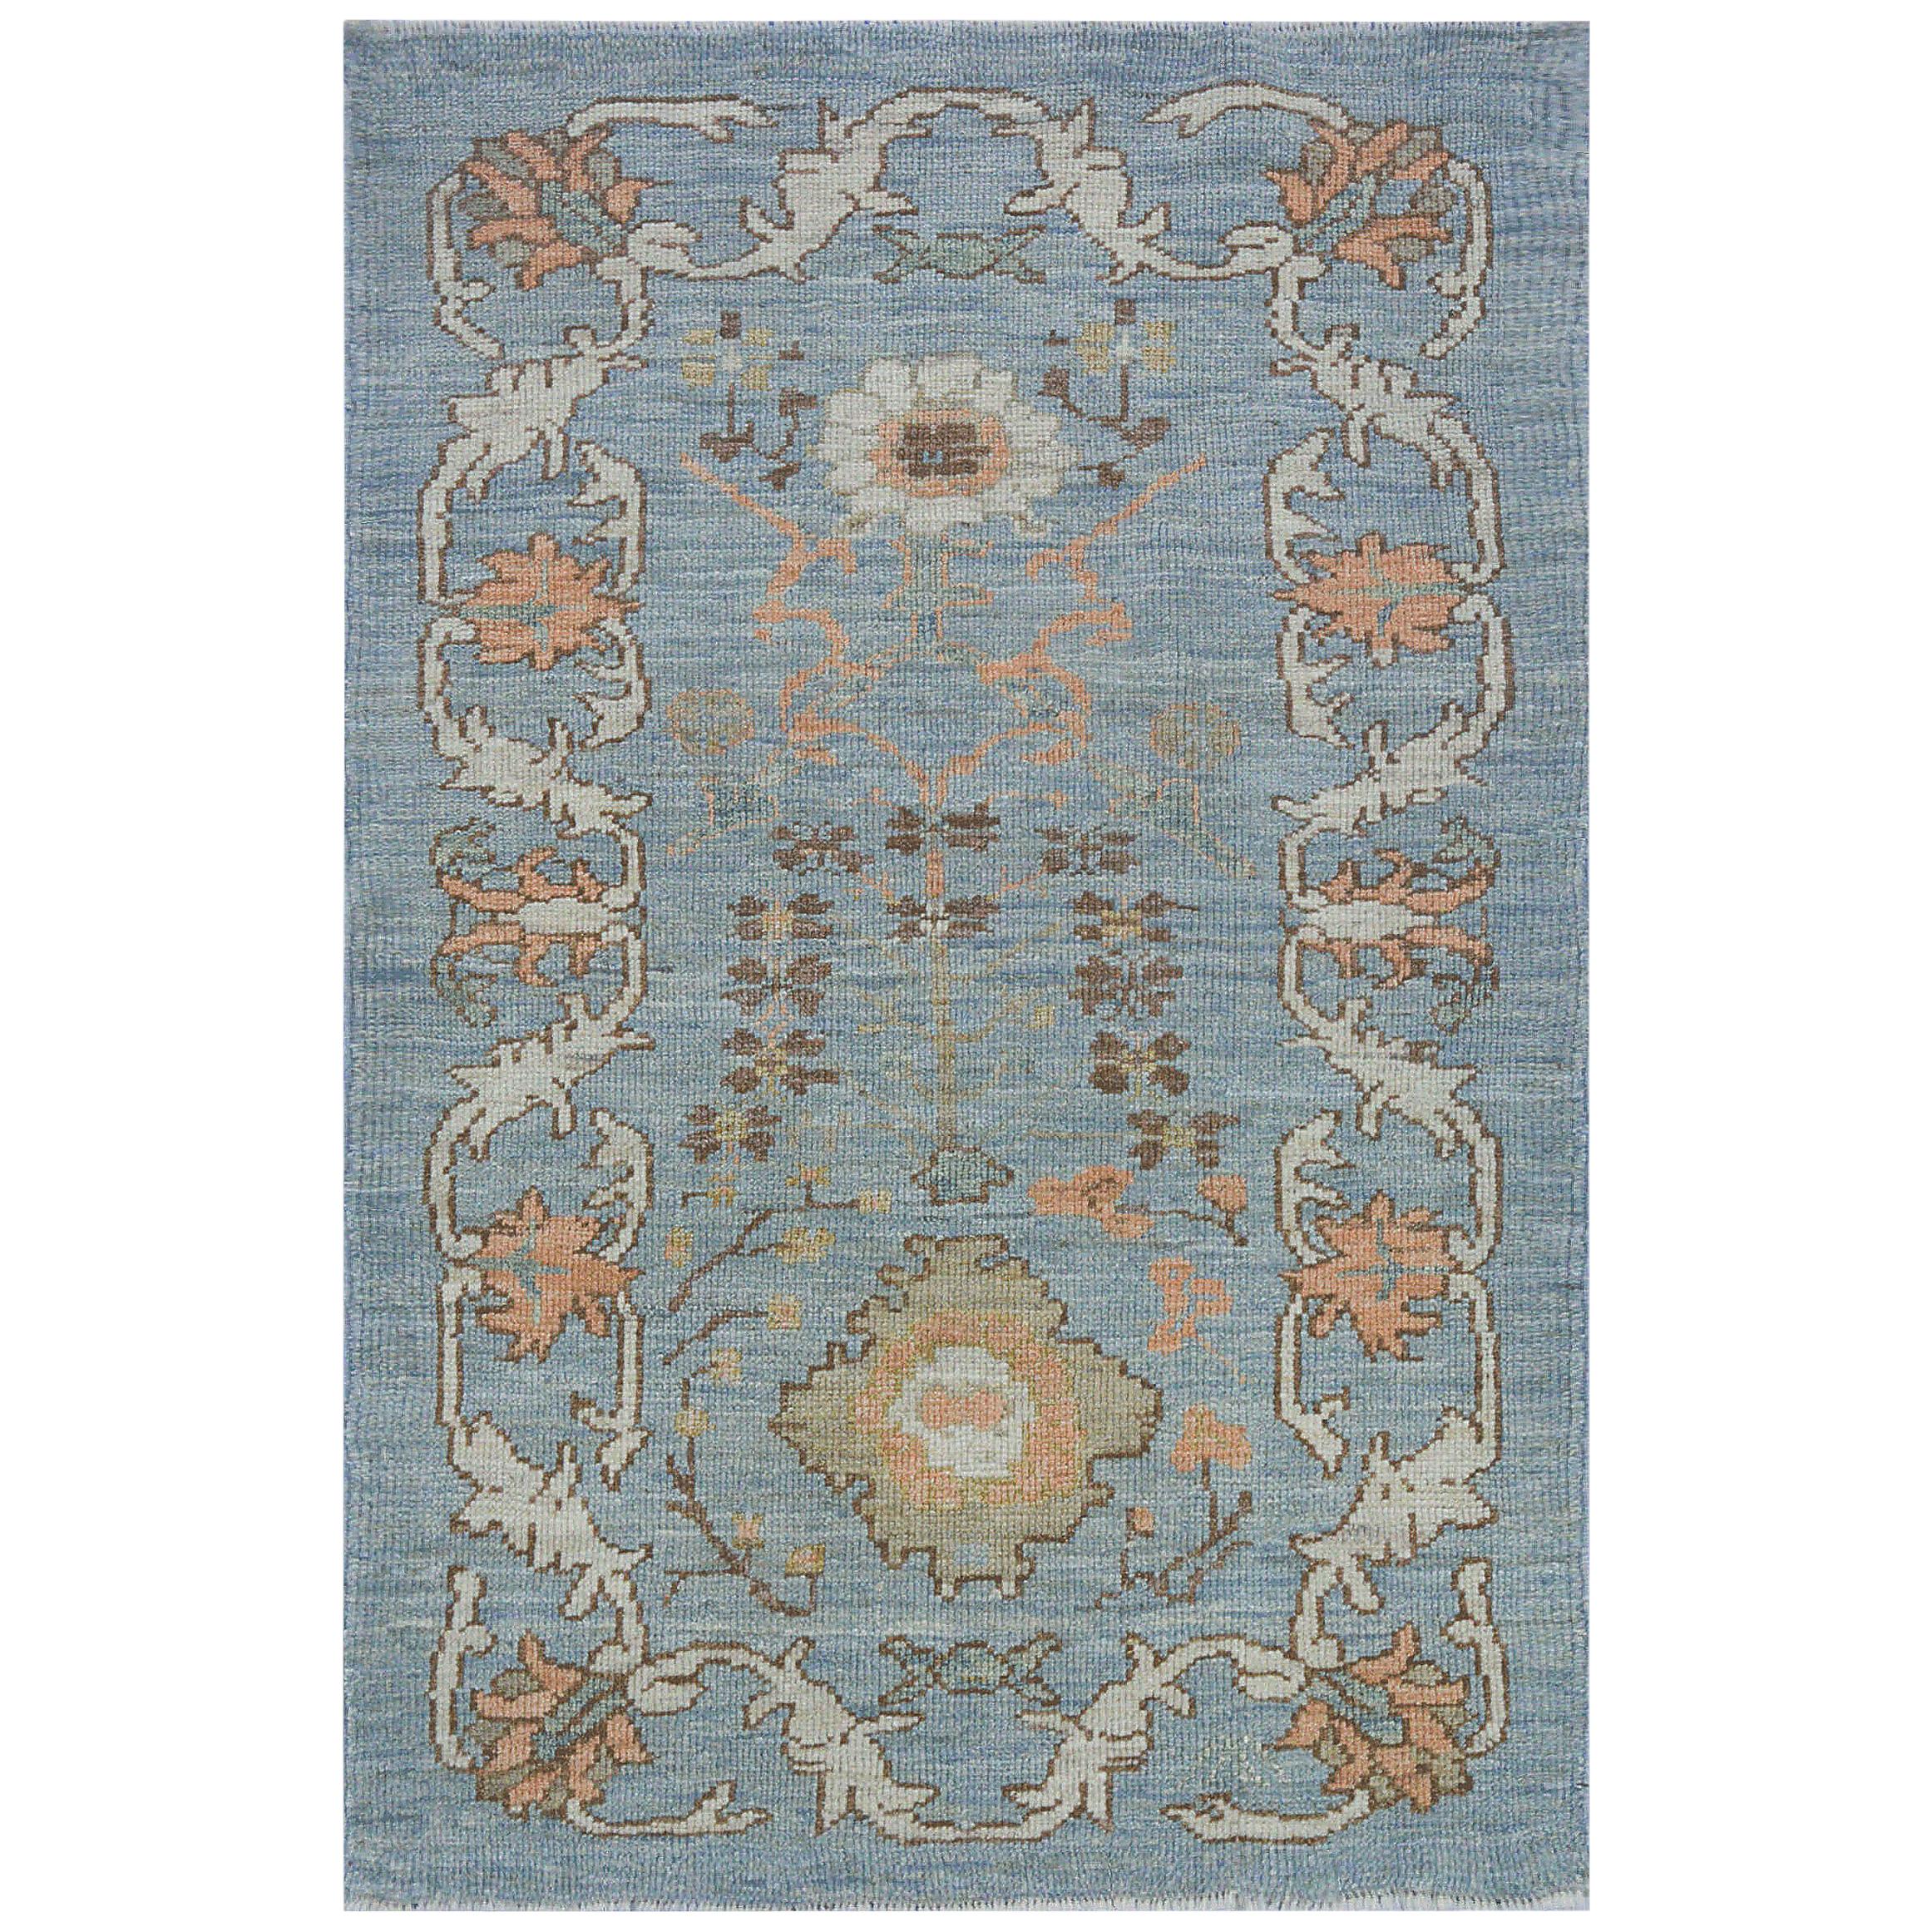 Modern Oushak Rug in Blue with Floral Design Motifs in Ivory, Pink and Brown